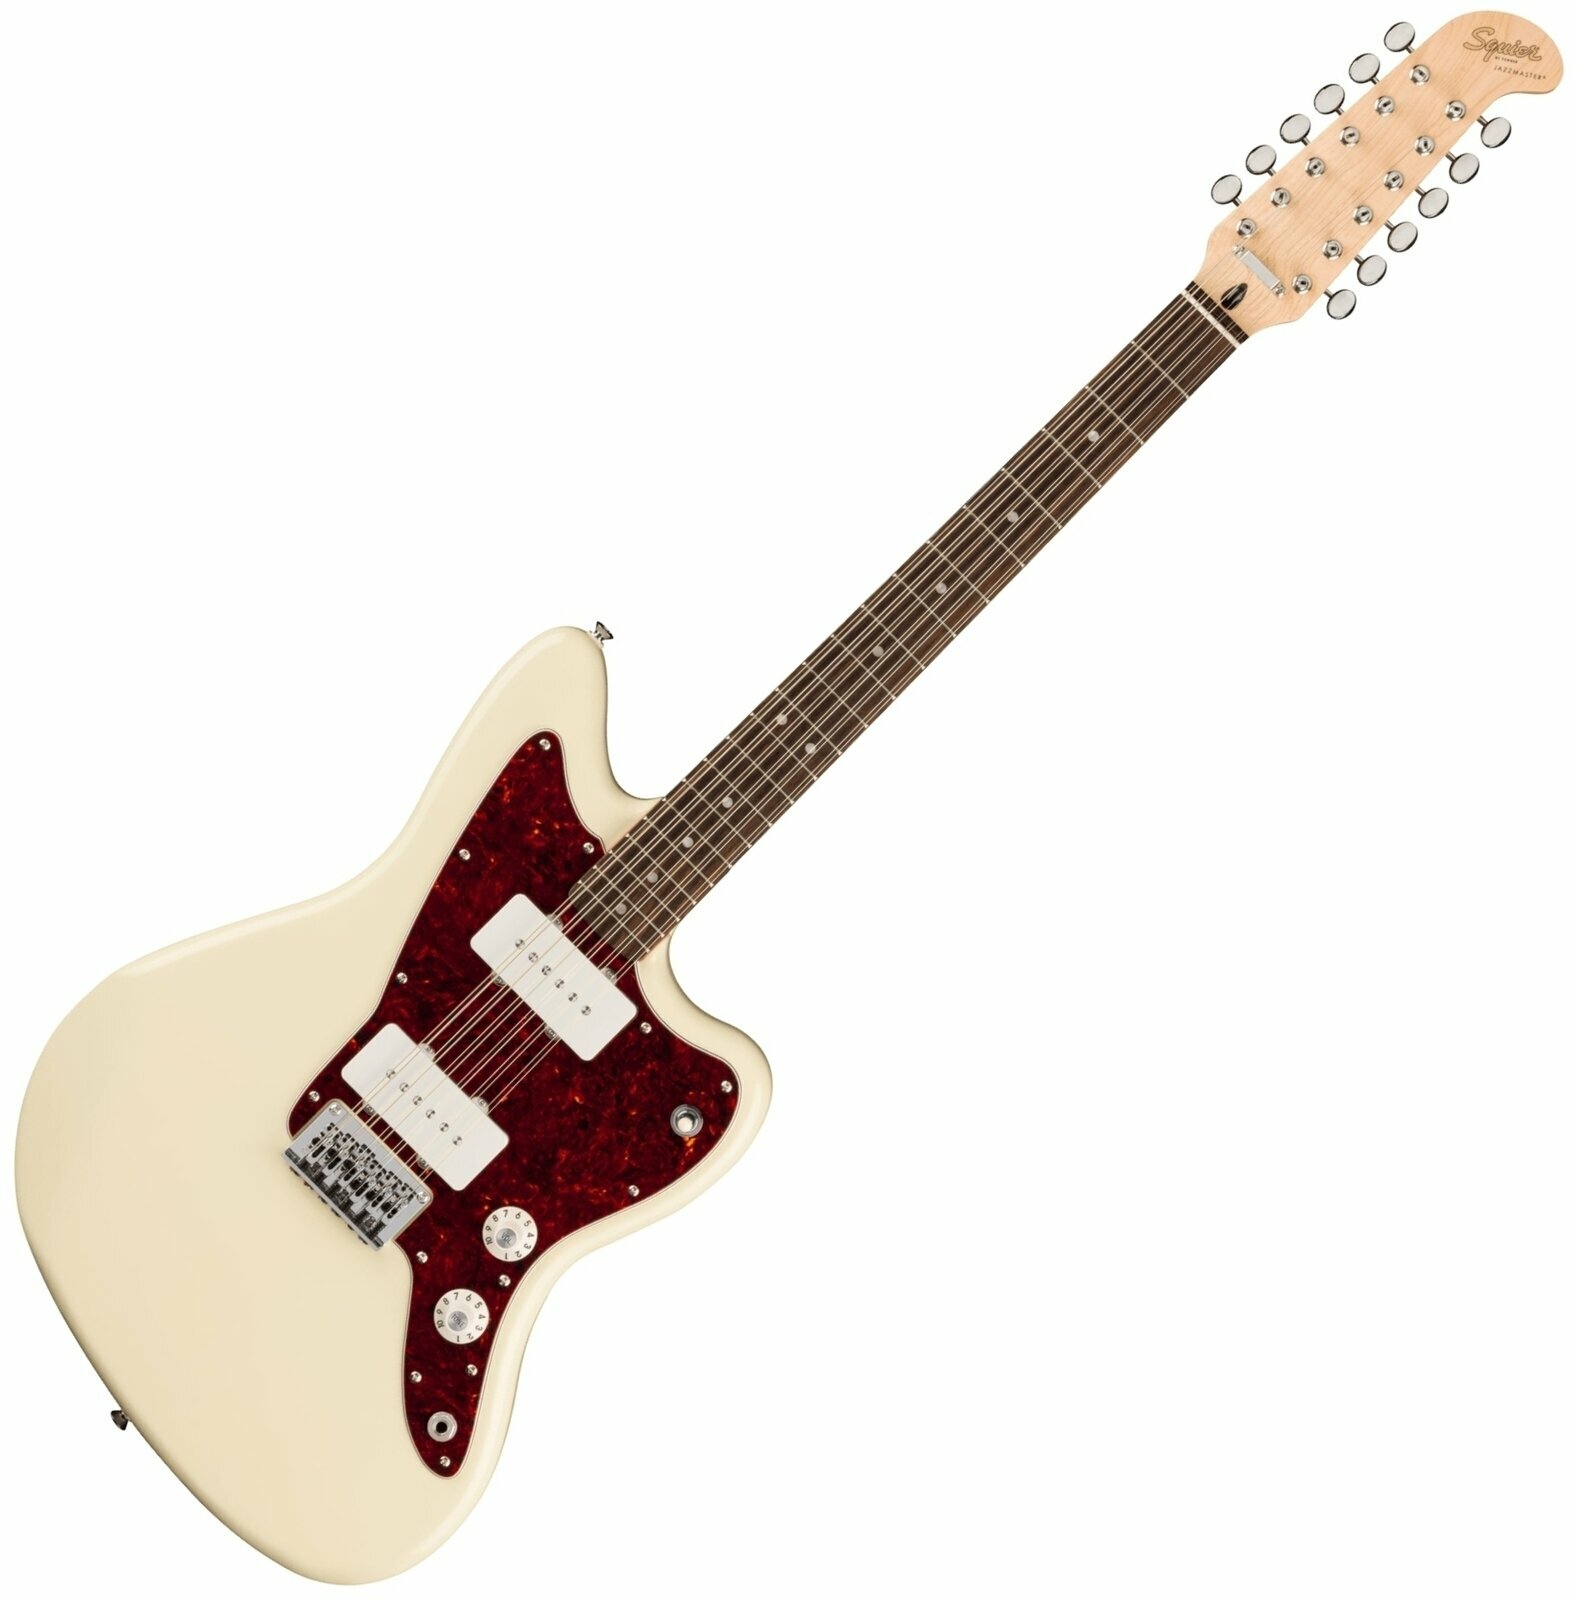 Fender Squier Paranormal Jazzmaster XII Olympic White Fender Squier